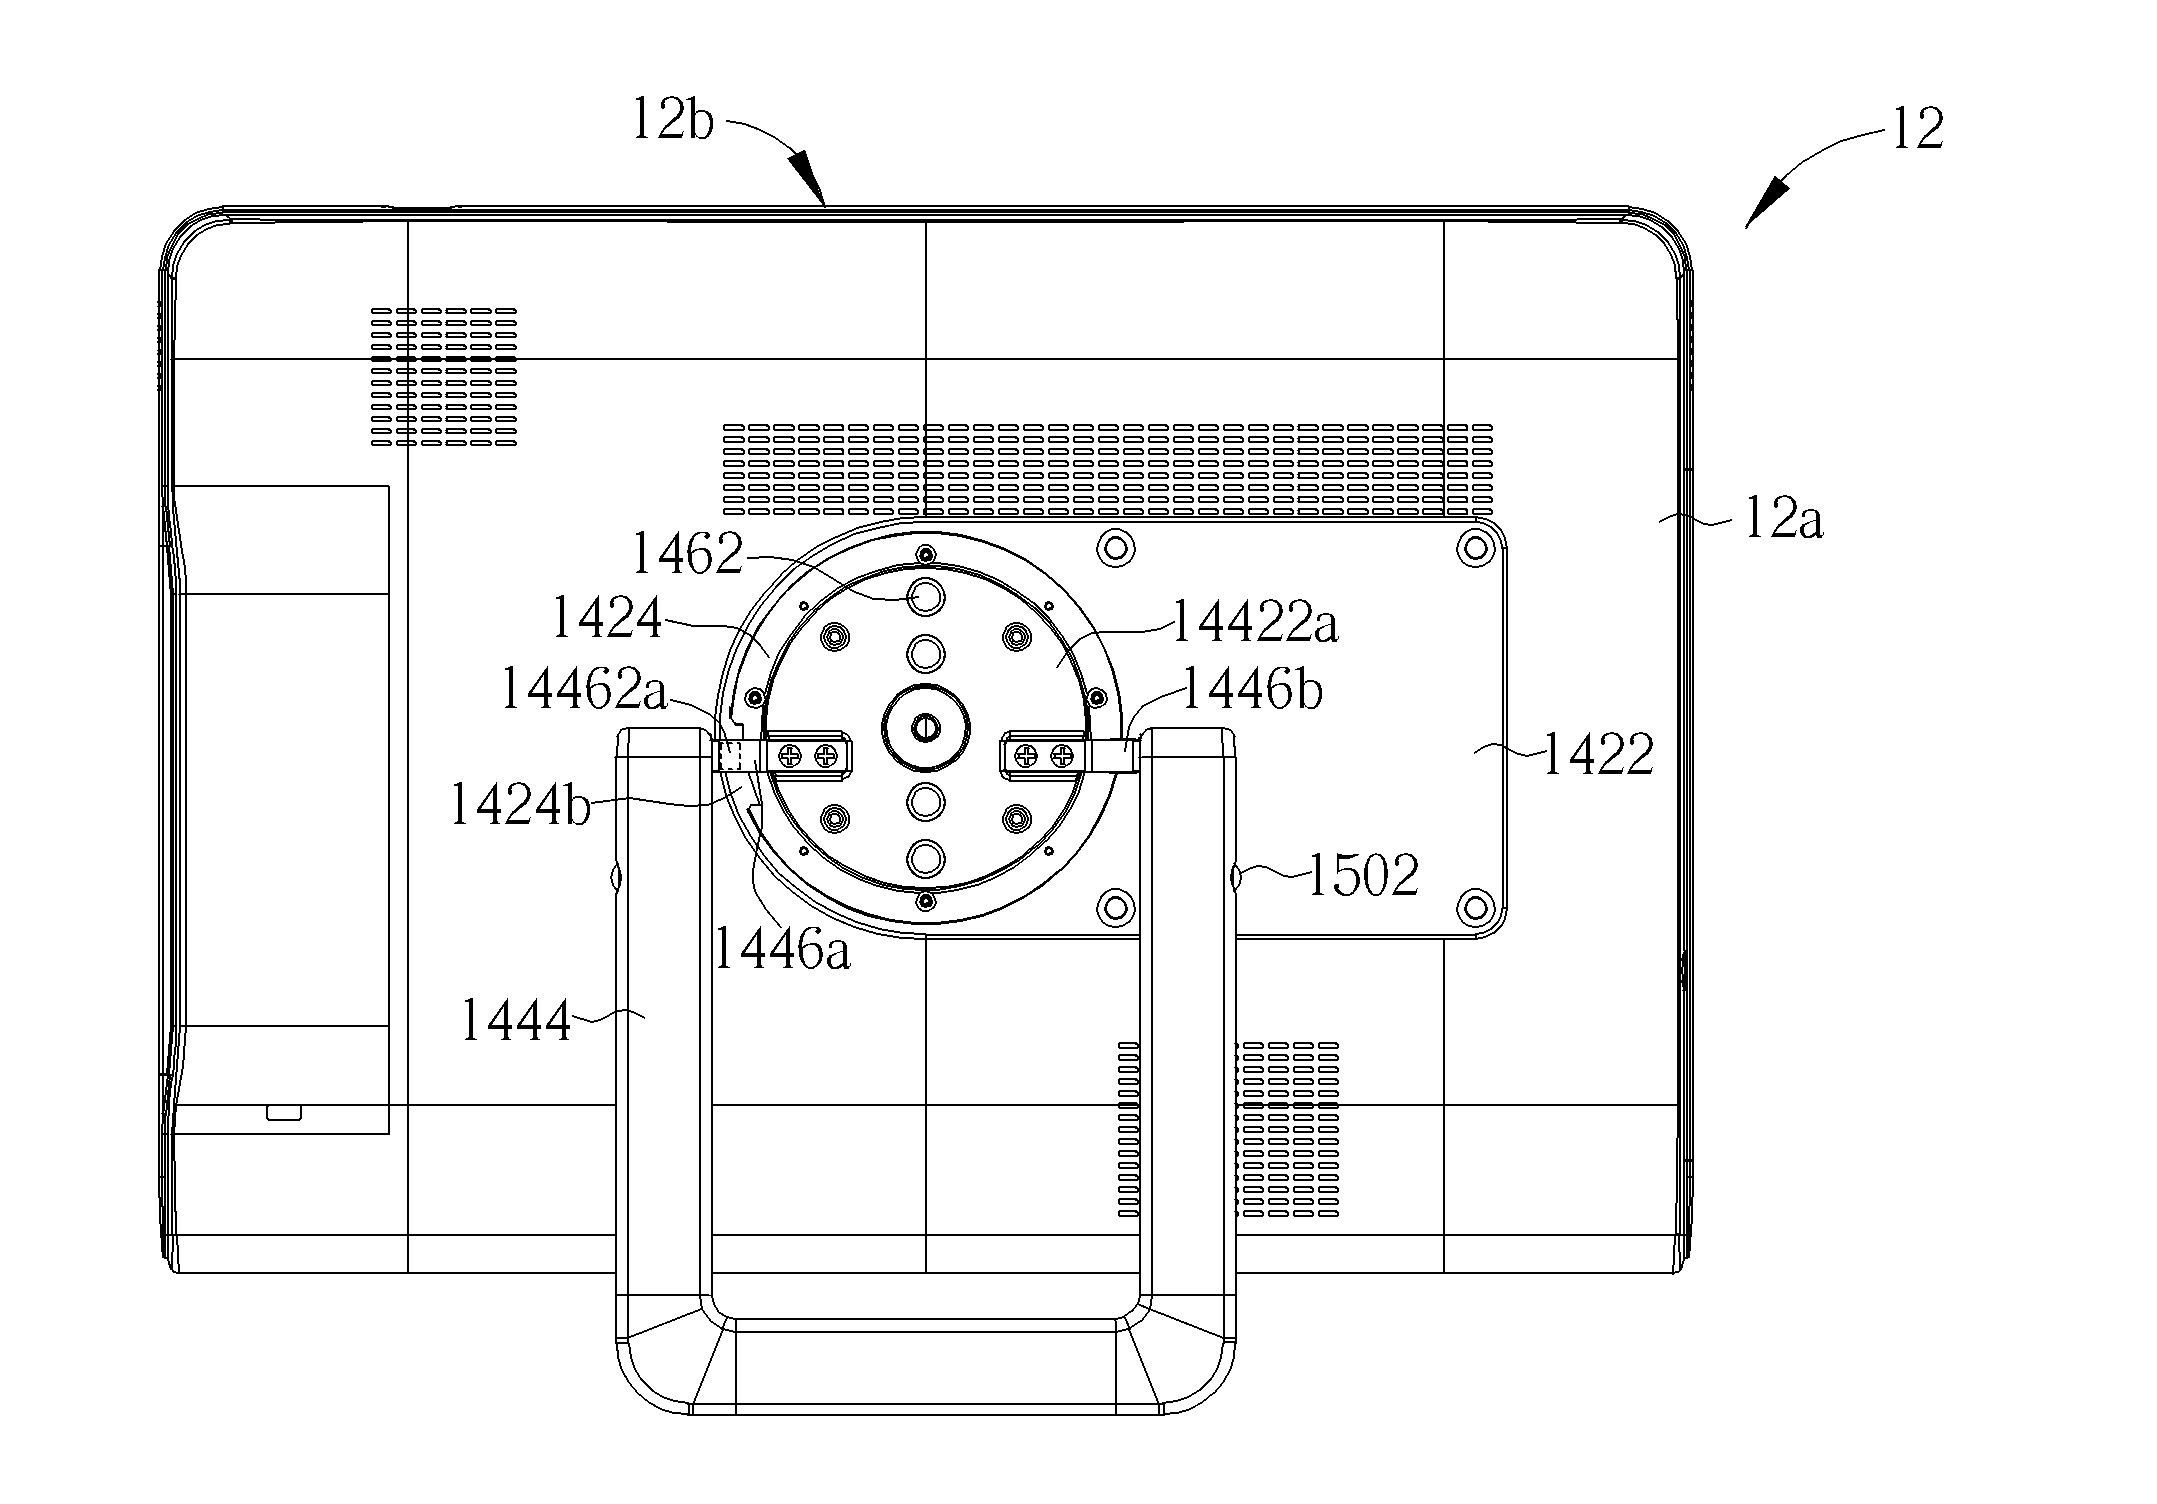 Display with a supporting mechanism